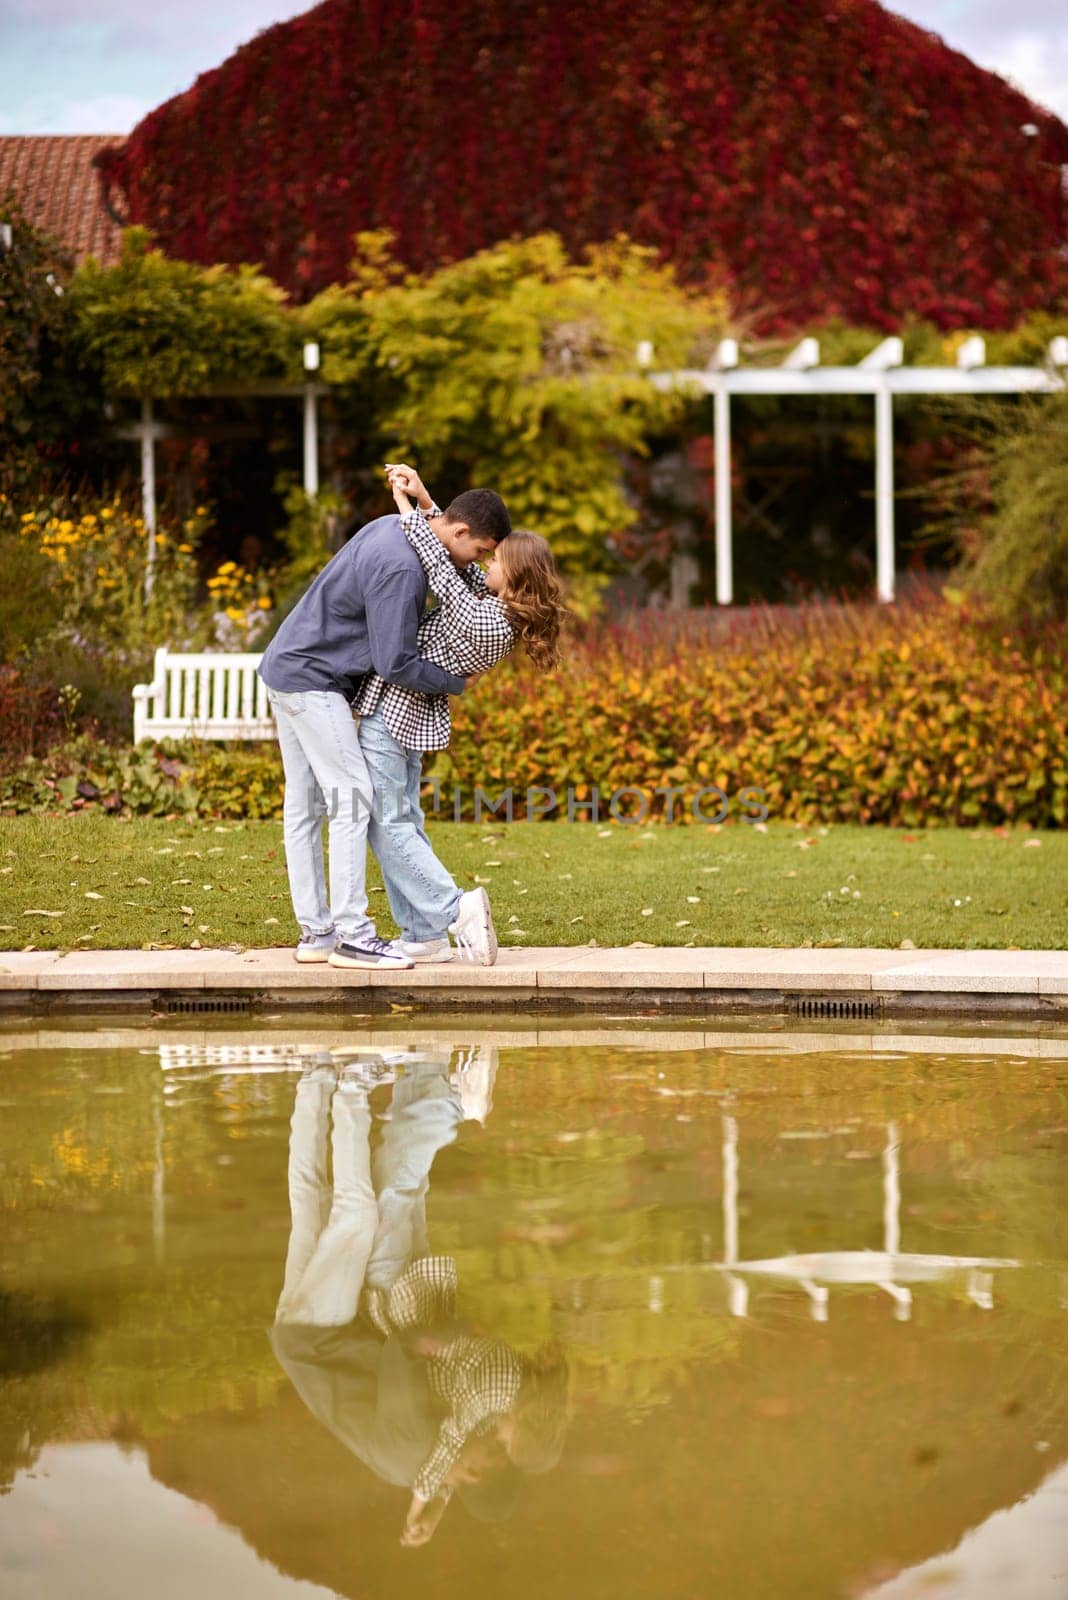 A couple in love hugs on the shore of a city pond in the European town. love story against the backdrop of autumn nature. Embraced by Love: Couple by the City Pond in a European Town. Autumn Affair: Romance on the European City Pond. Couple's Affection in Autumn by Andrii_Ko